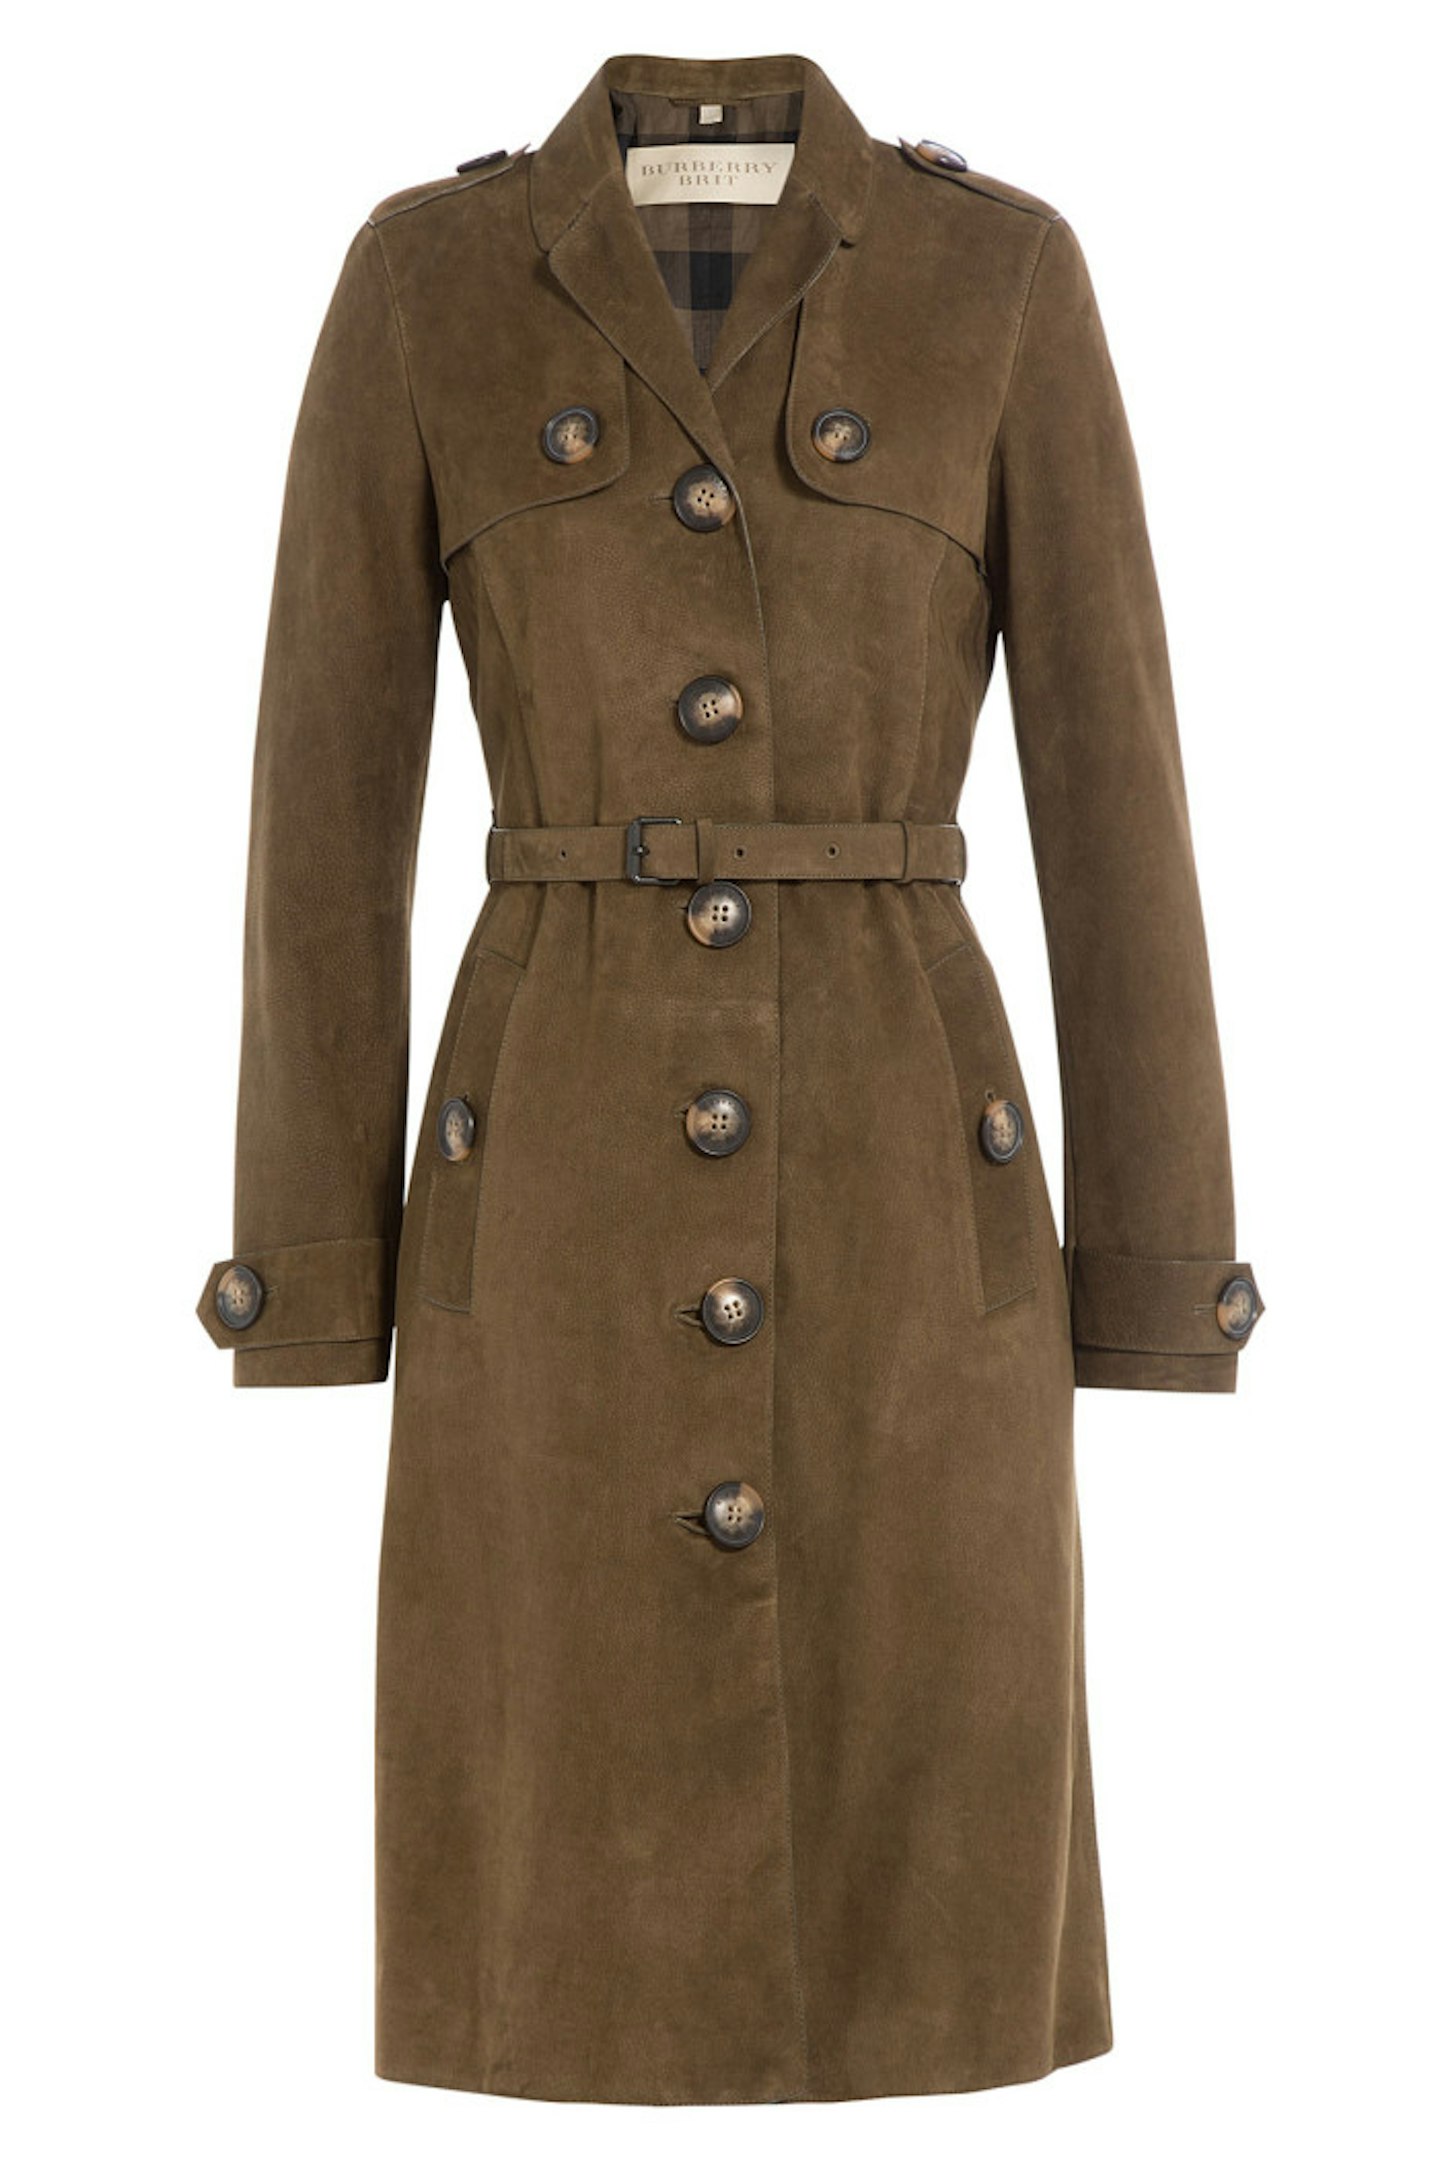 Burberry Brit Suede Trench Coat, £1,795.00